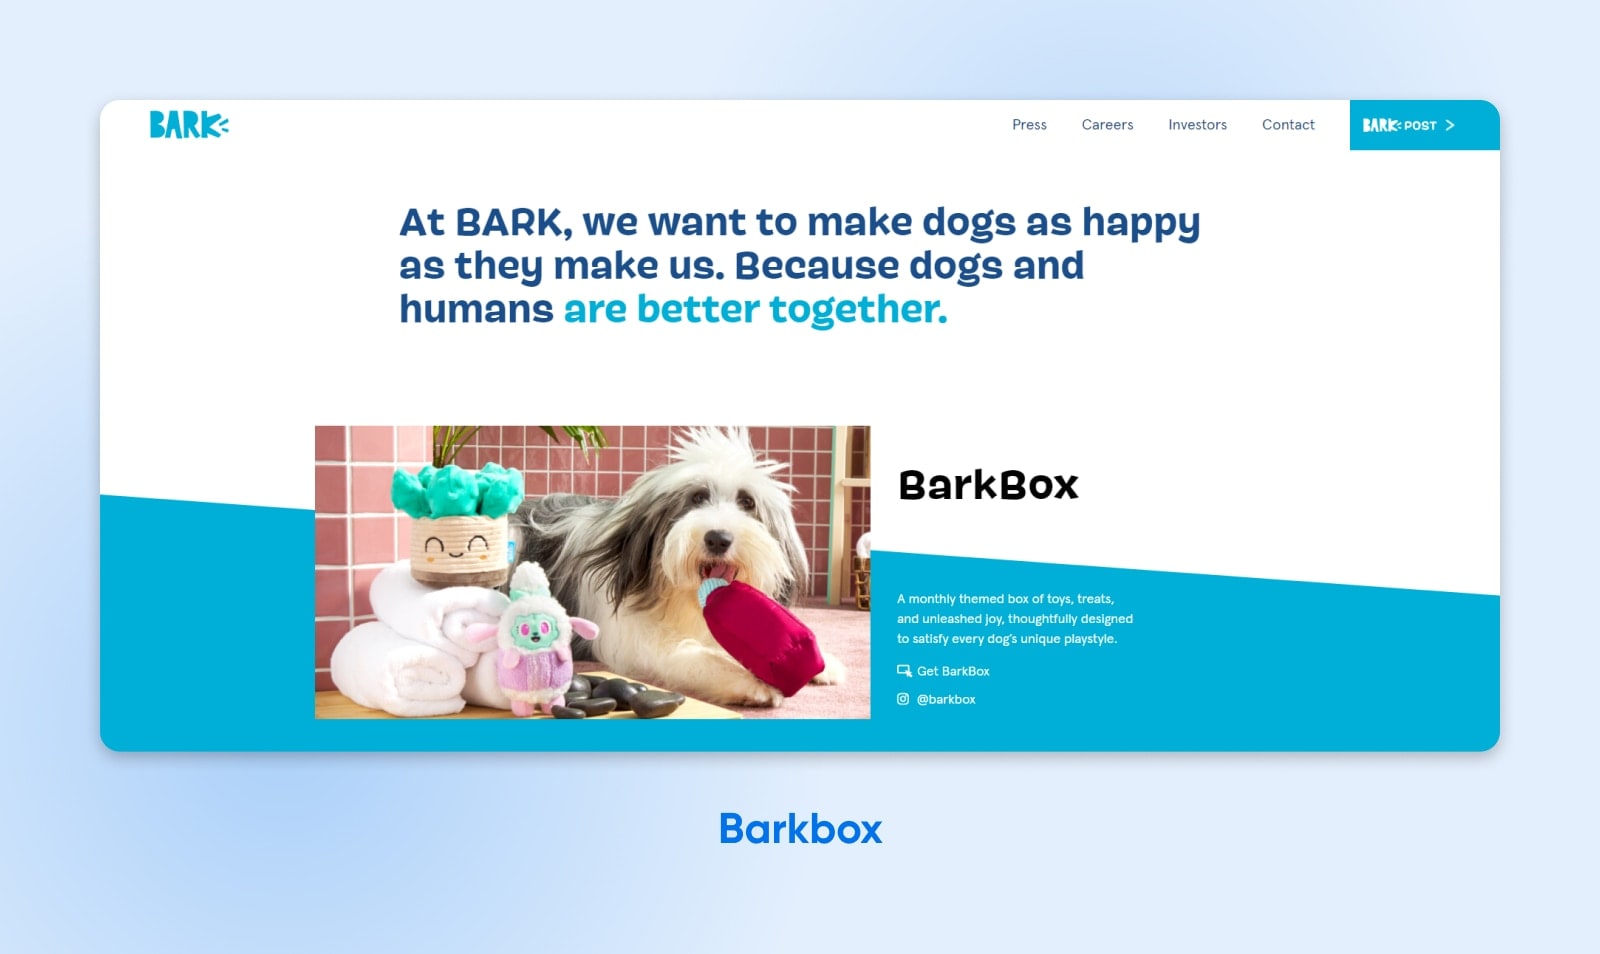 Barkbox "About Us" page